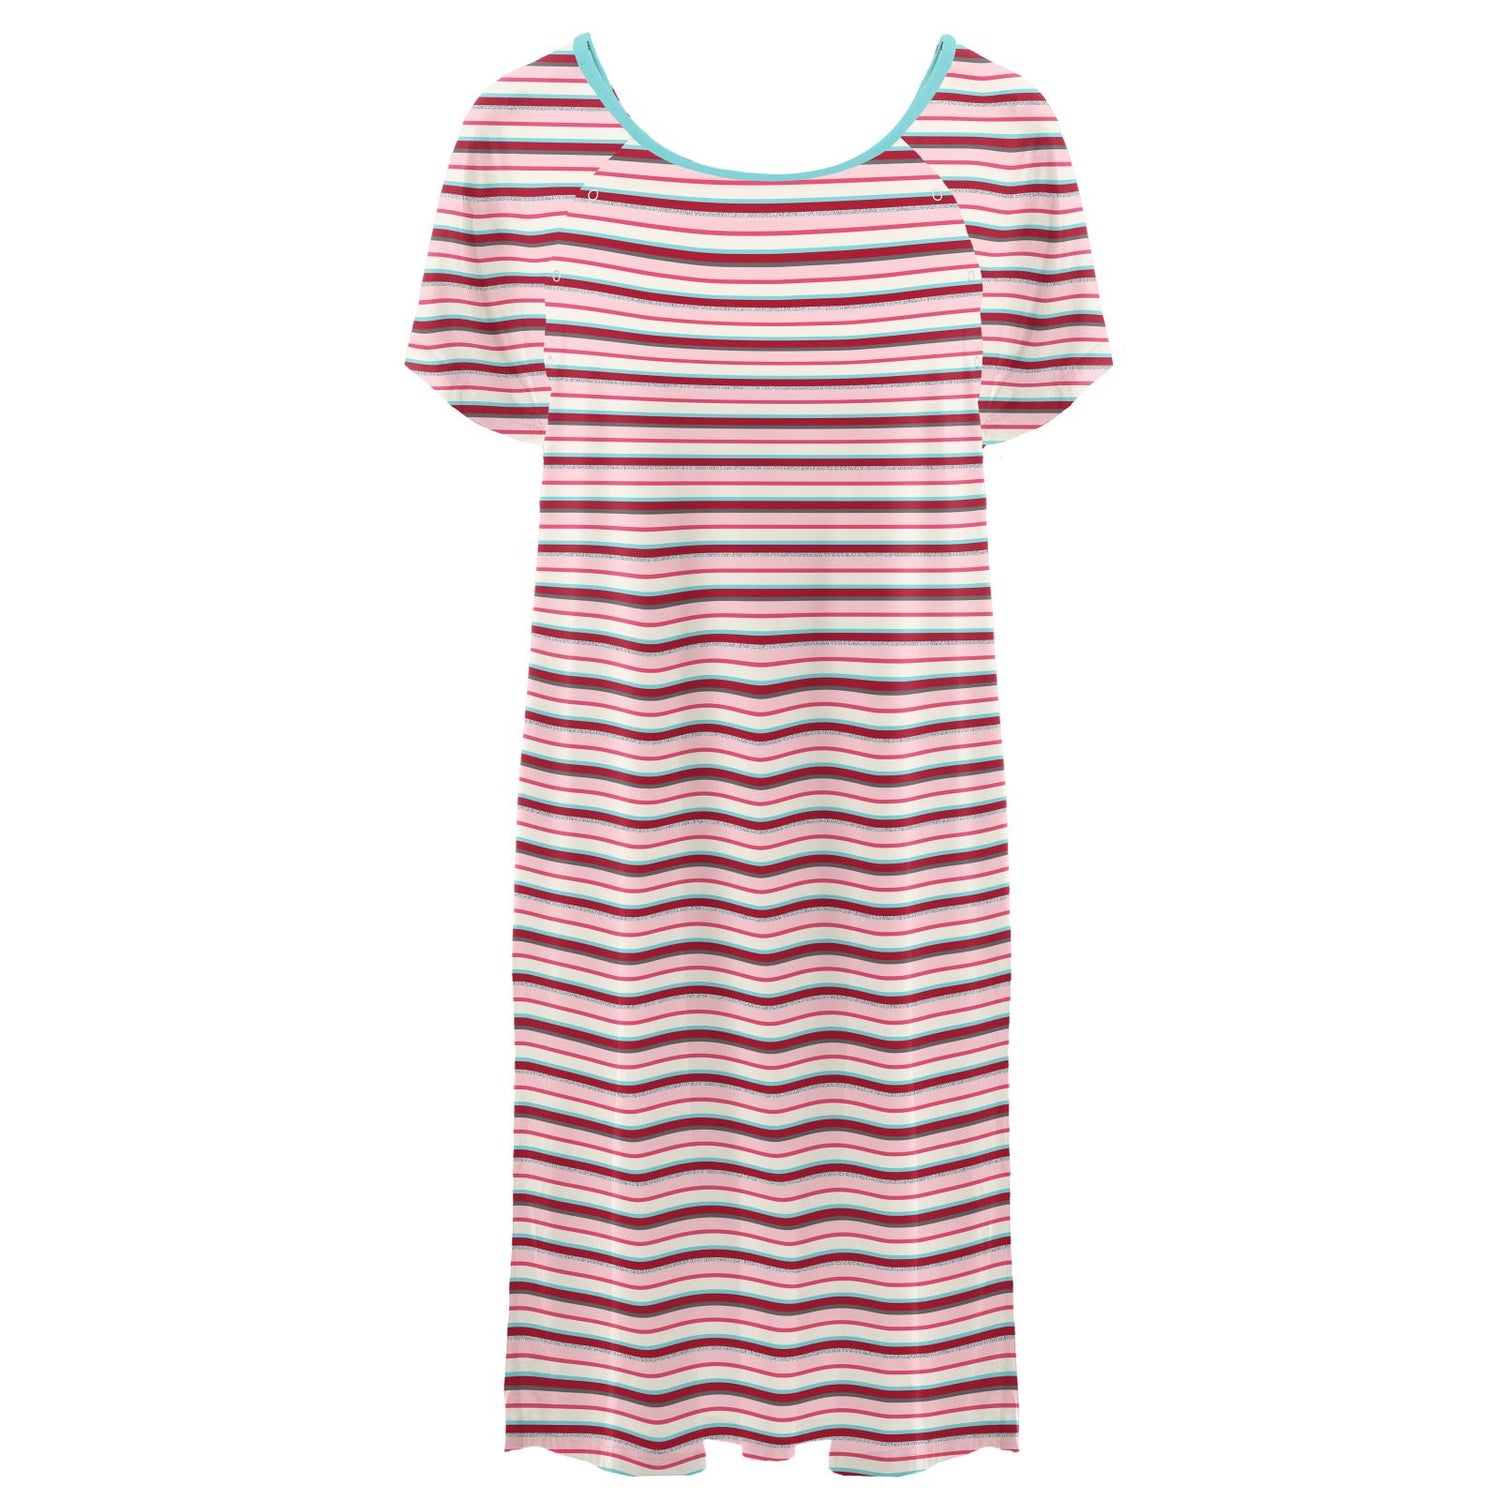 Women's Print Hospital Gown in Anniversary Bobsled Stripe